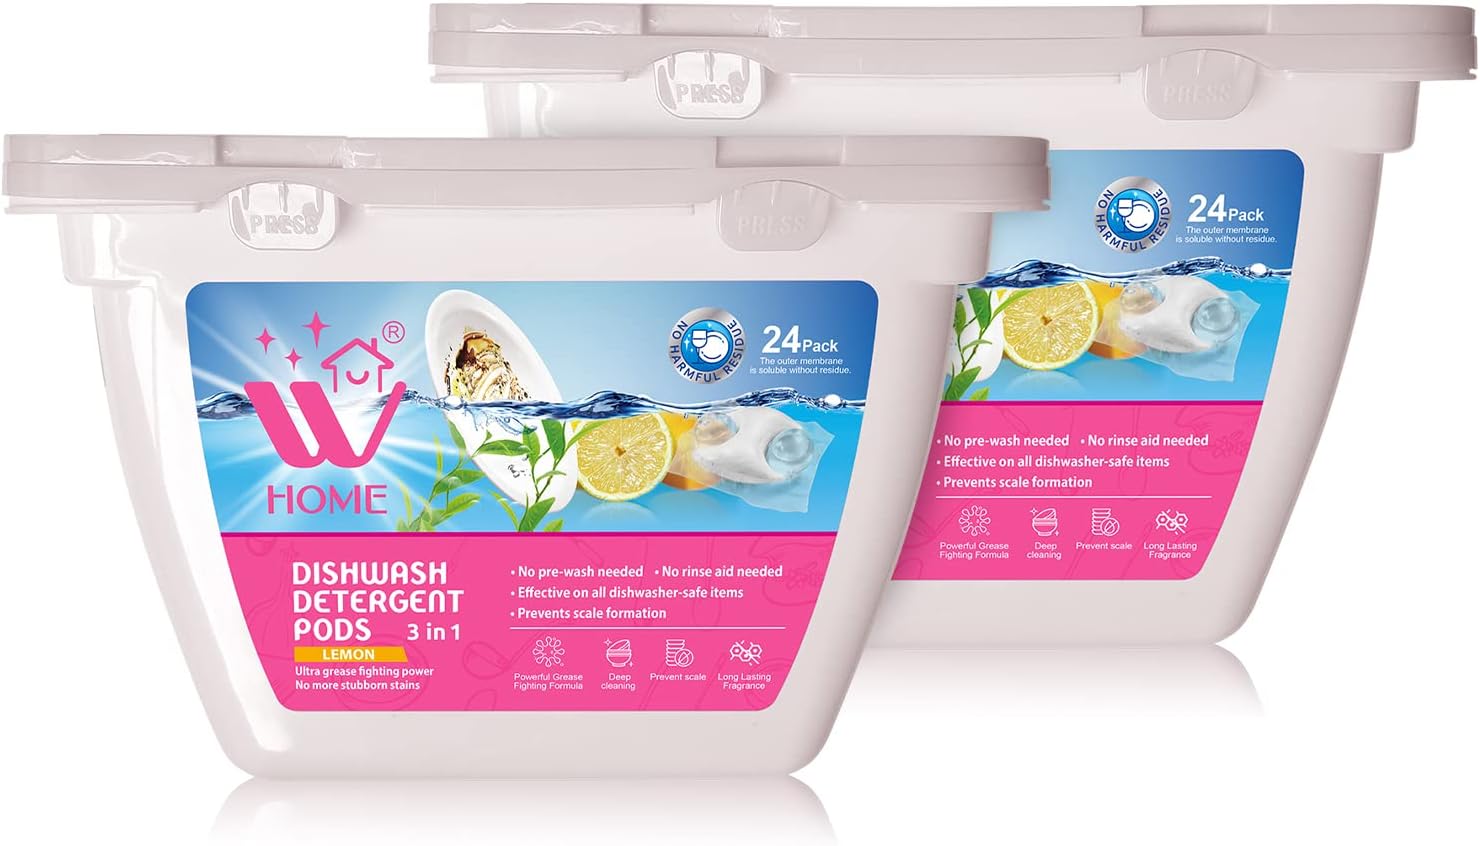 Innovation in laundry detergents: Ariel 3in1 PODS, Blog